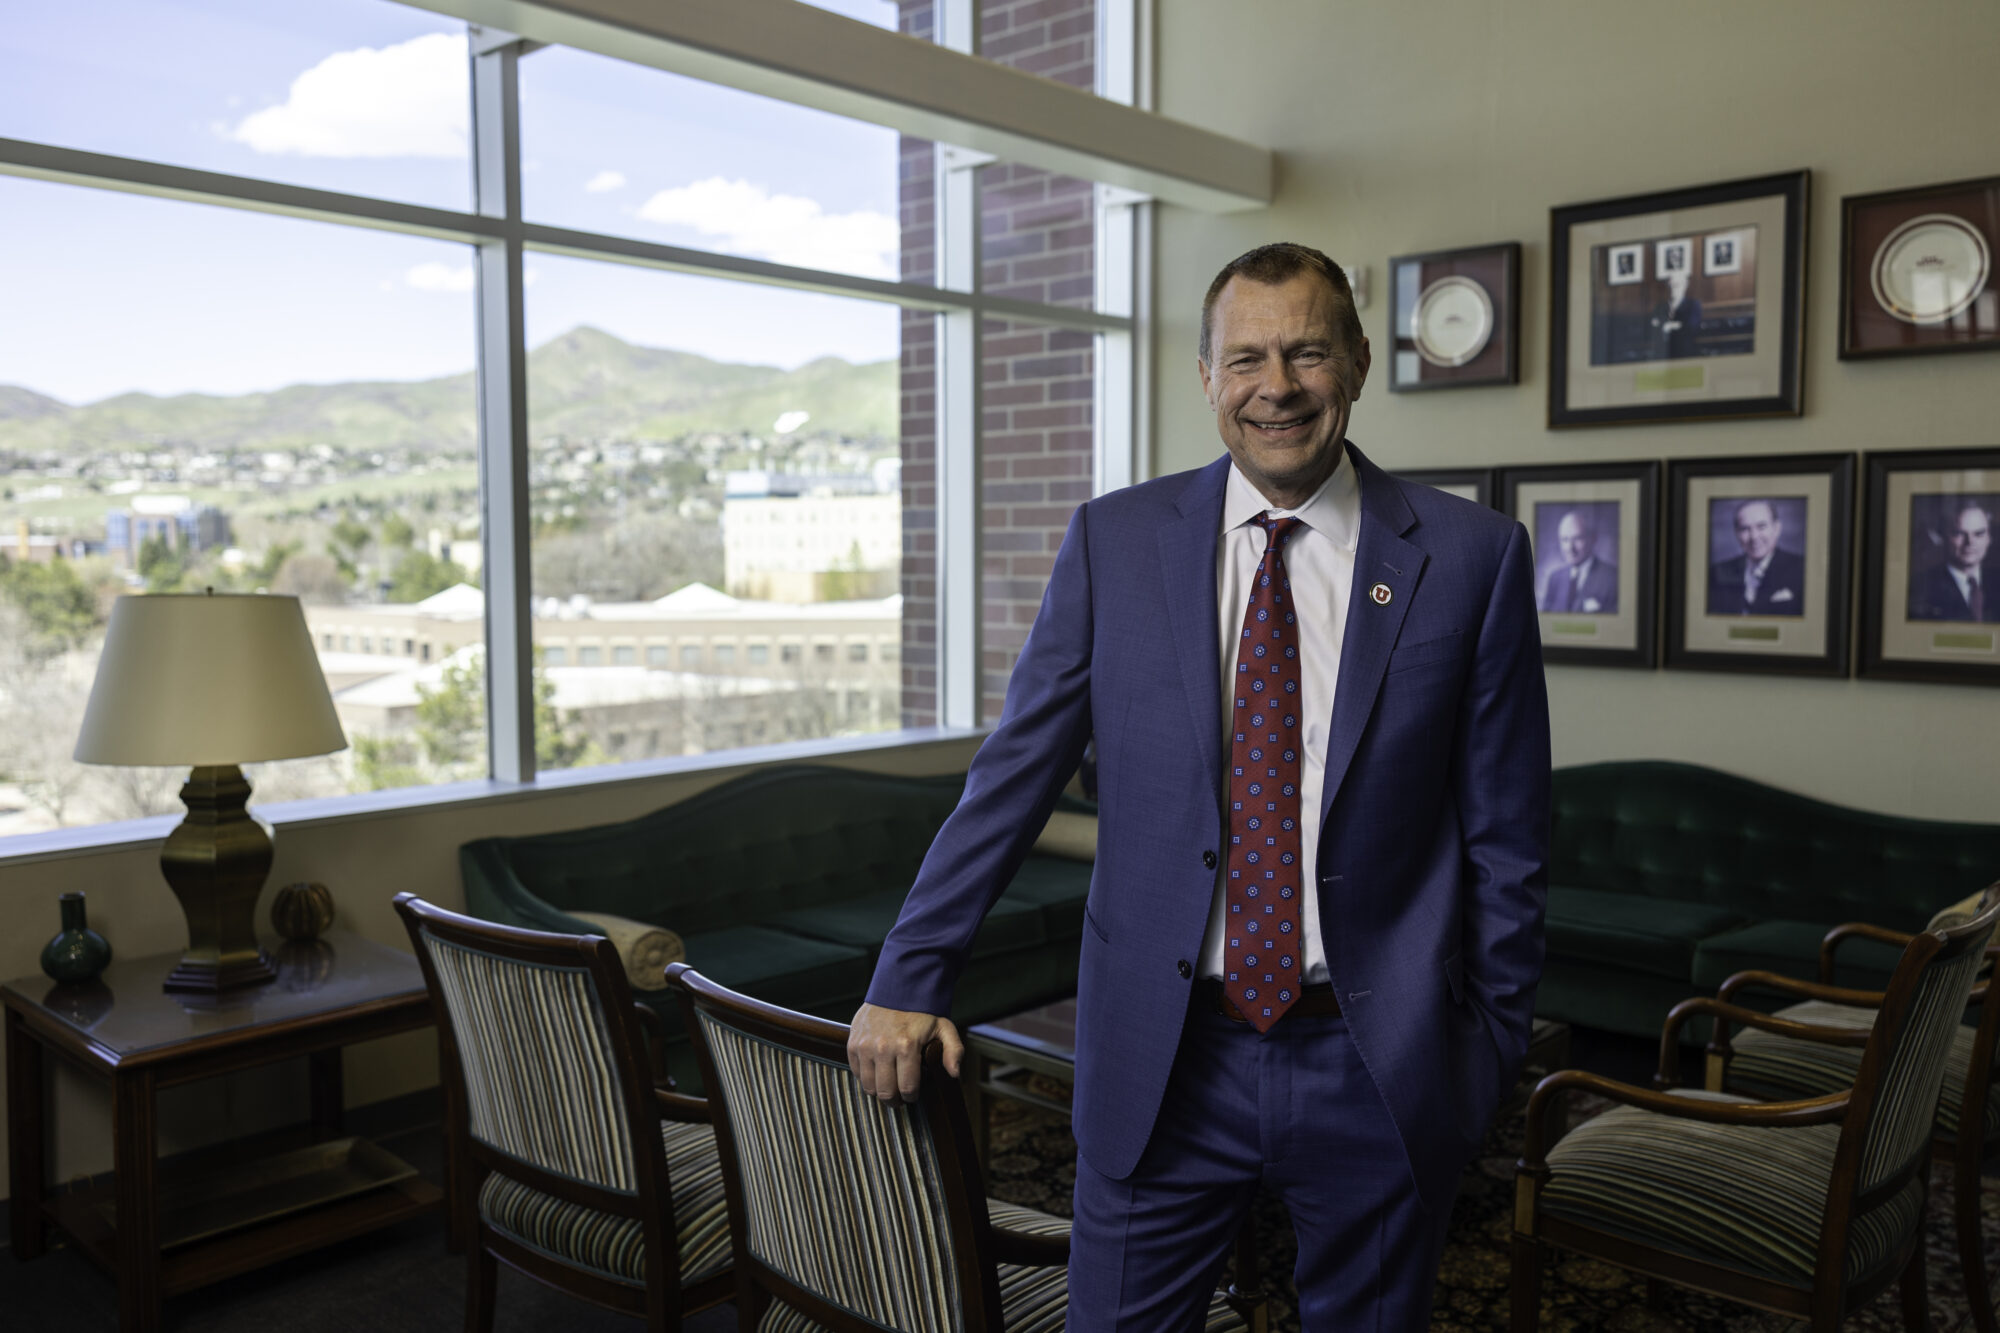 Dr. Kurt Dirks officially started his role as the new dean of the University of Utah’s David Eccles School of Business on Monday, officially succeeding Dr. Rachel Hayes, who was appointed in 2021.